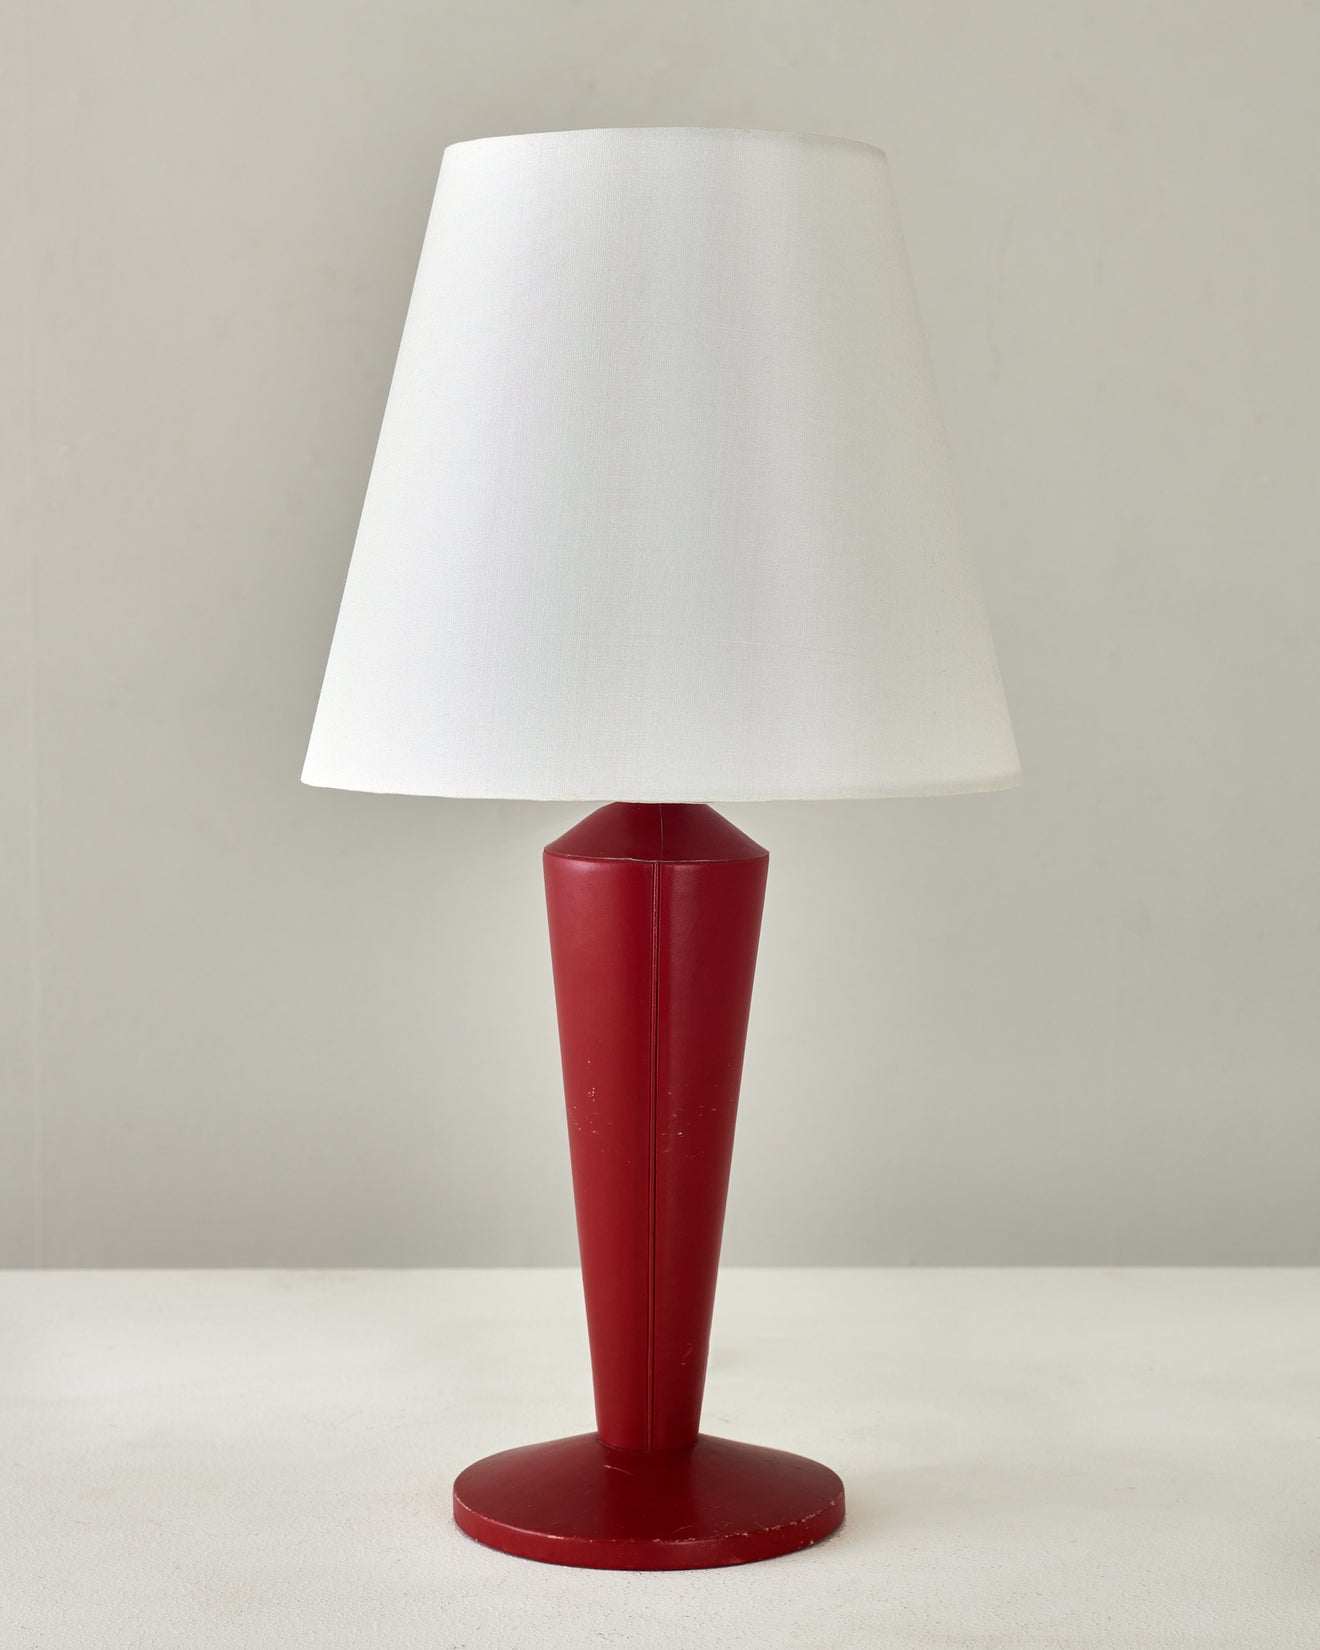 LEATHER TABLE LAMP IN THE STYLE OF ADNET